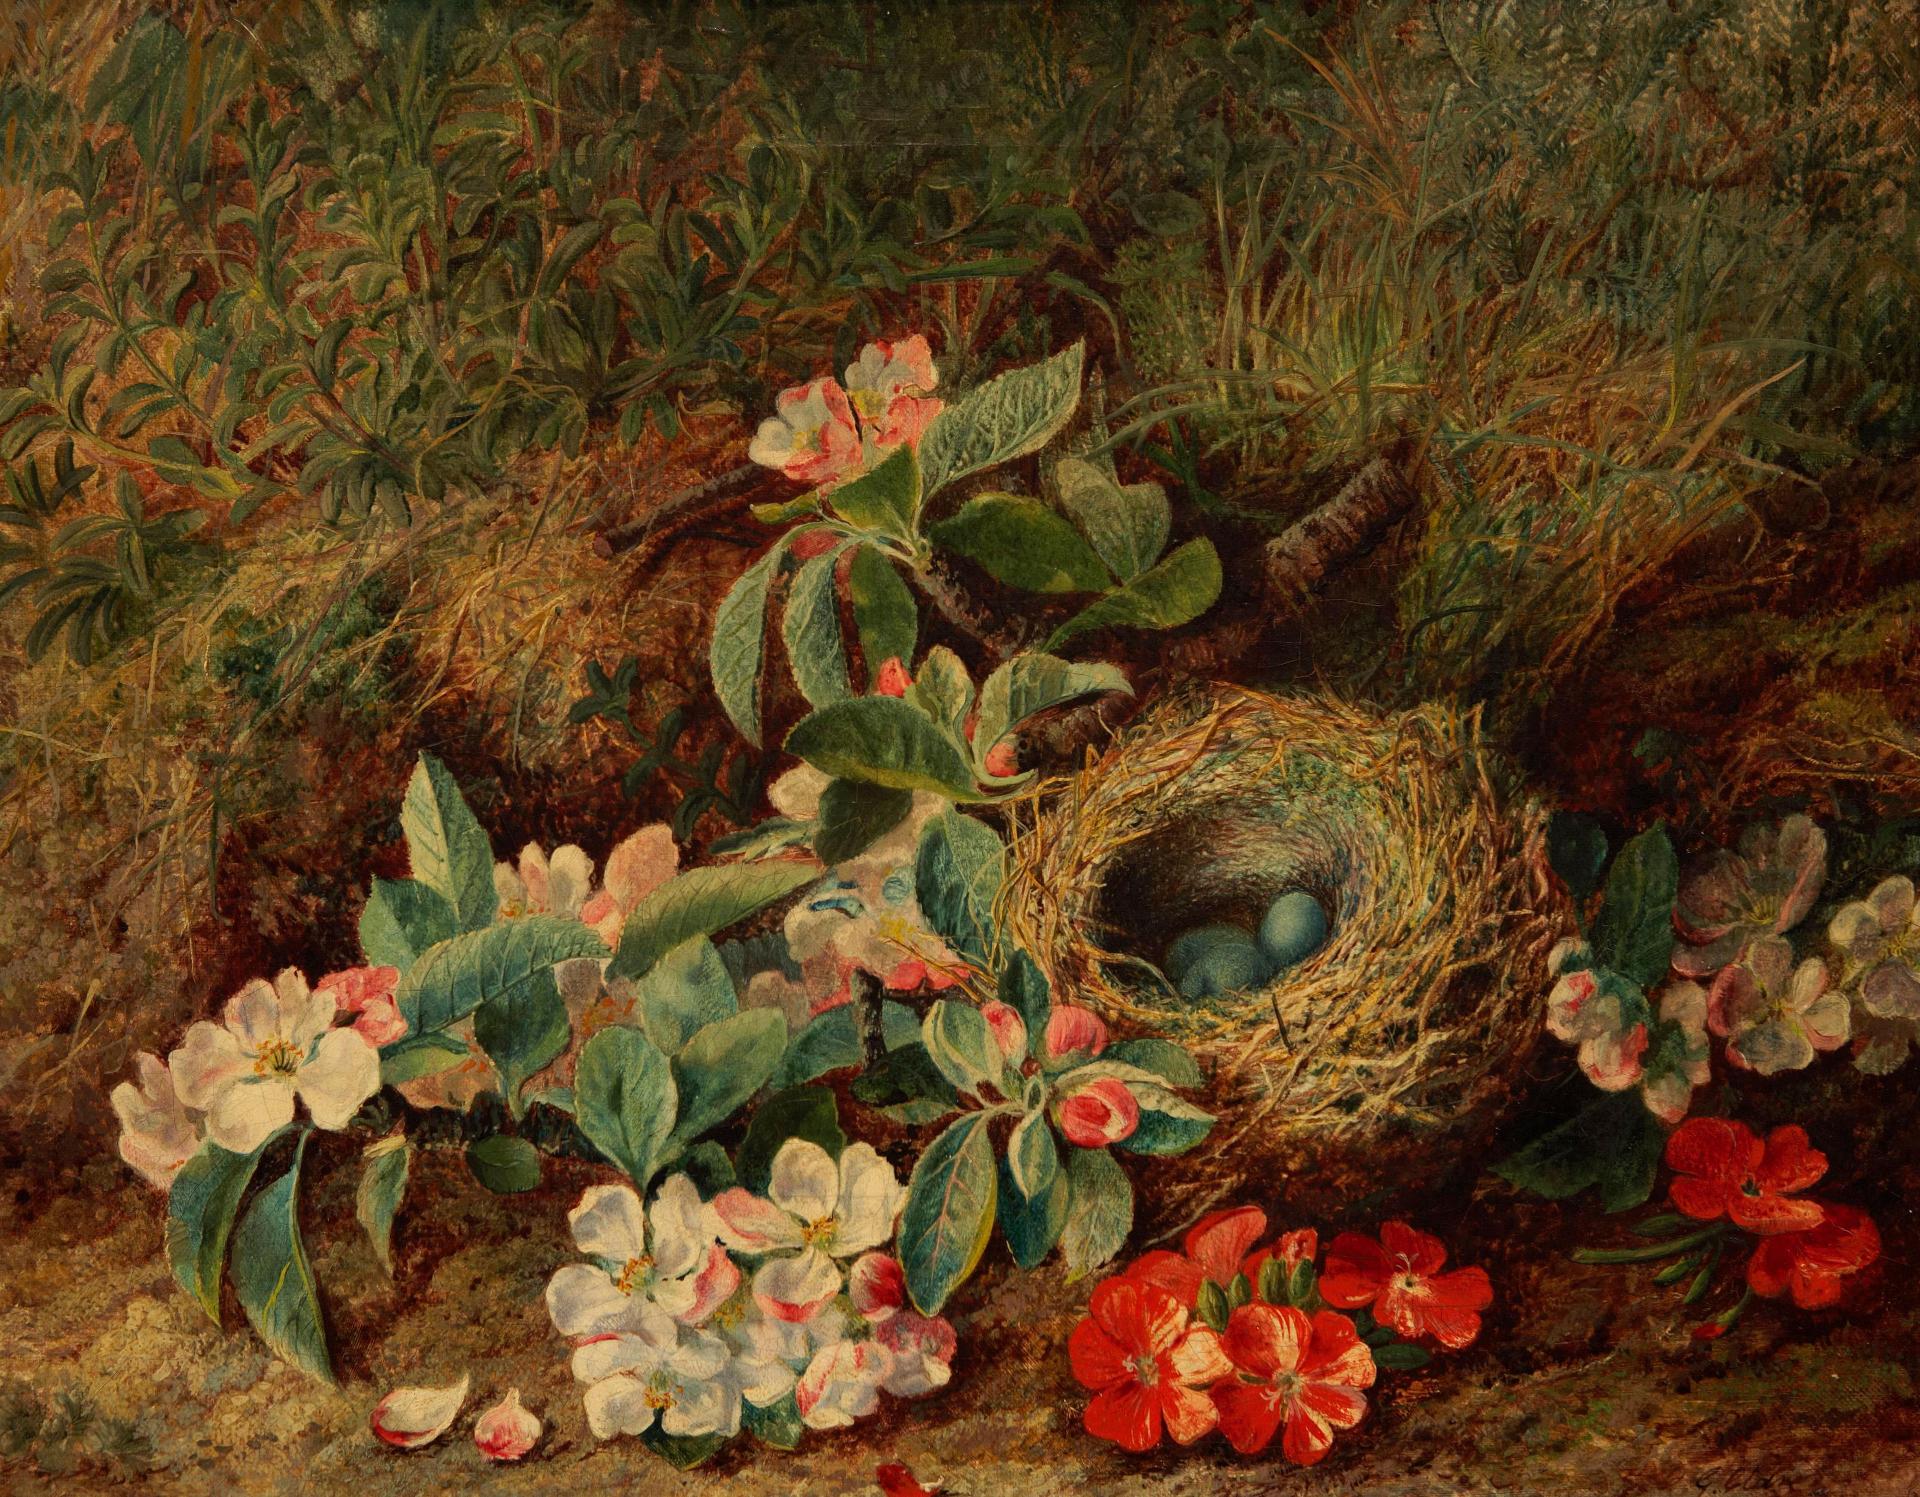 George Clare (1835-1890) - Flowers with Bird Nest